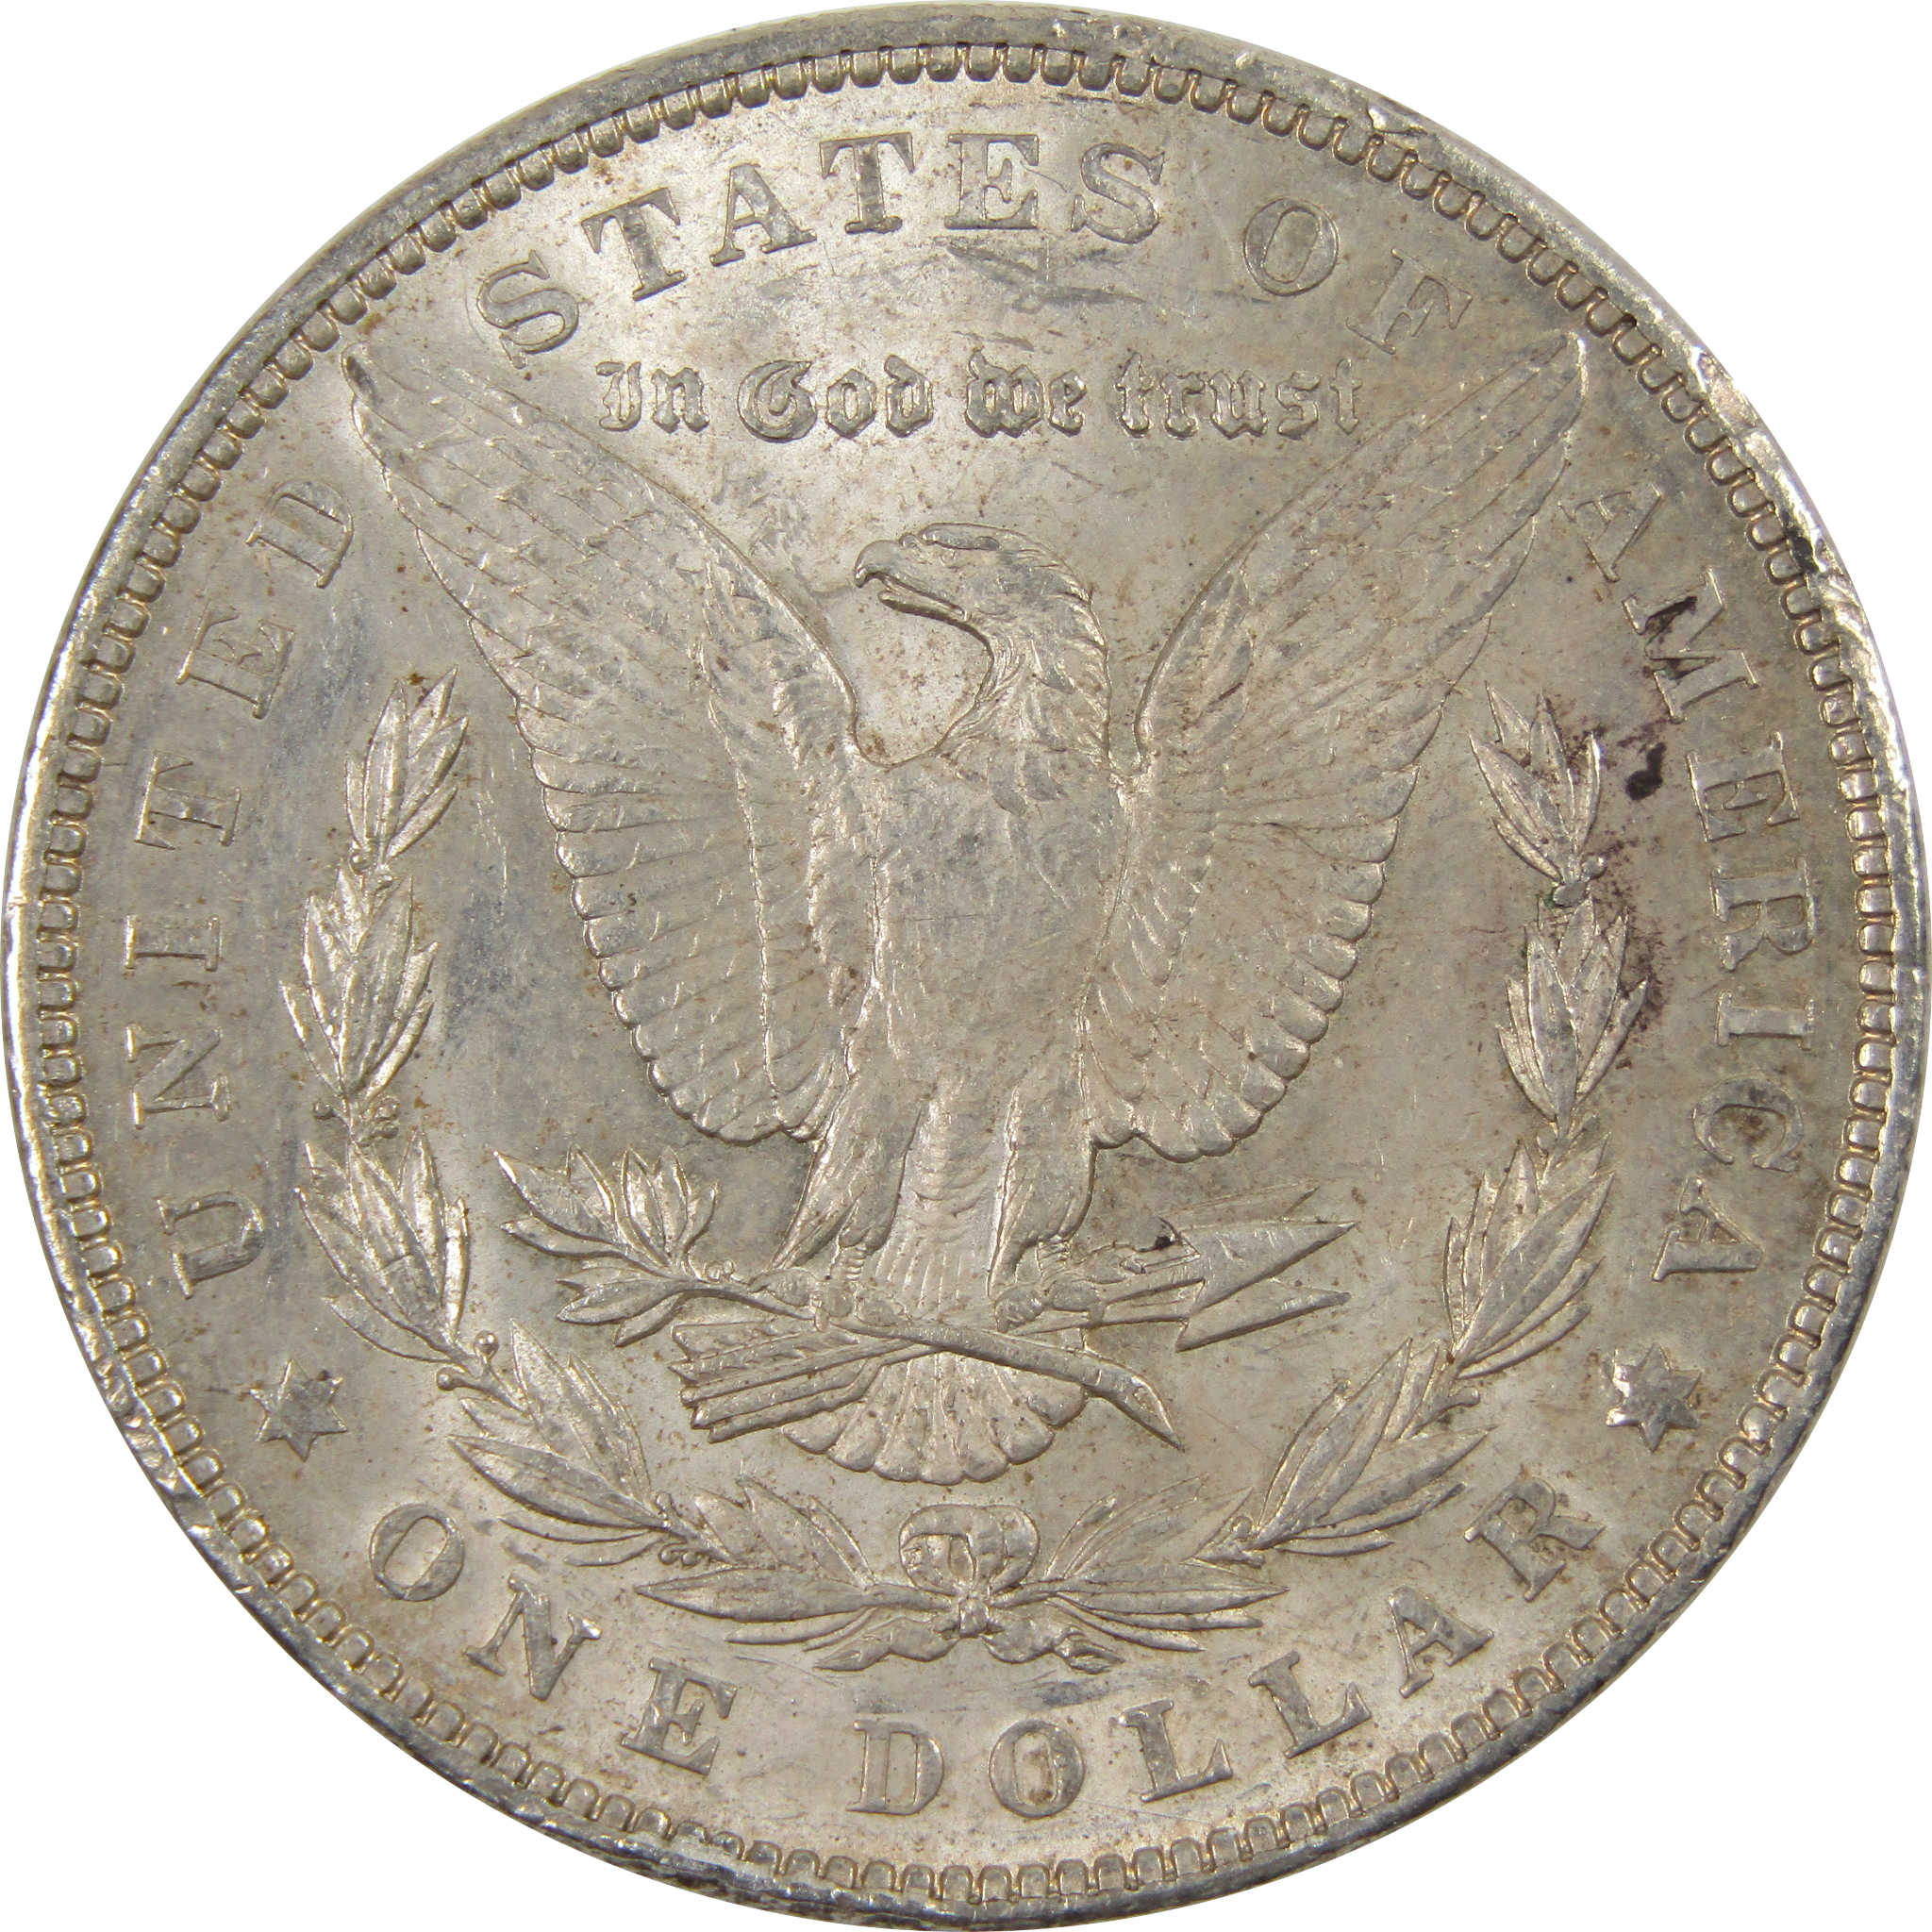 1902 Morgan Dollar AU About Uncirculated 90% Silver $1 Coin SKU:I8346 - Morgan coin - Morgan silver dollar - Morgan silver dollar for sale - Profile Coins &amp; Collectibles